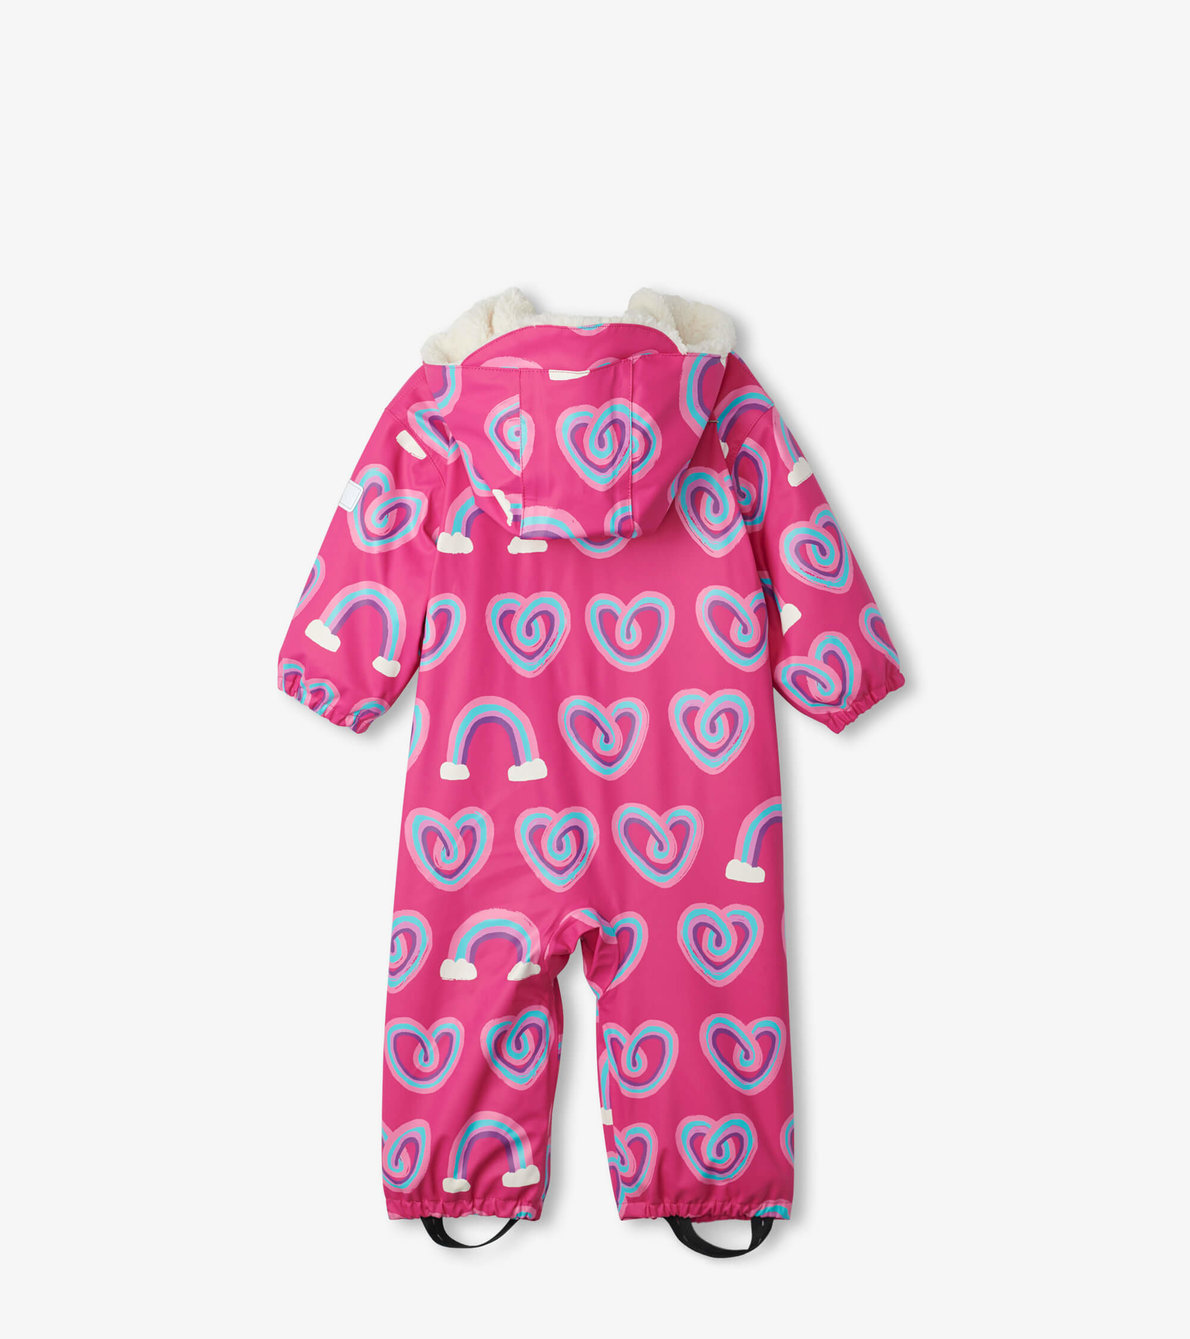 View larger image of Twisty Rainbow Hearts Sherpa Lined Baby Rain Suit